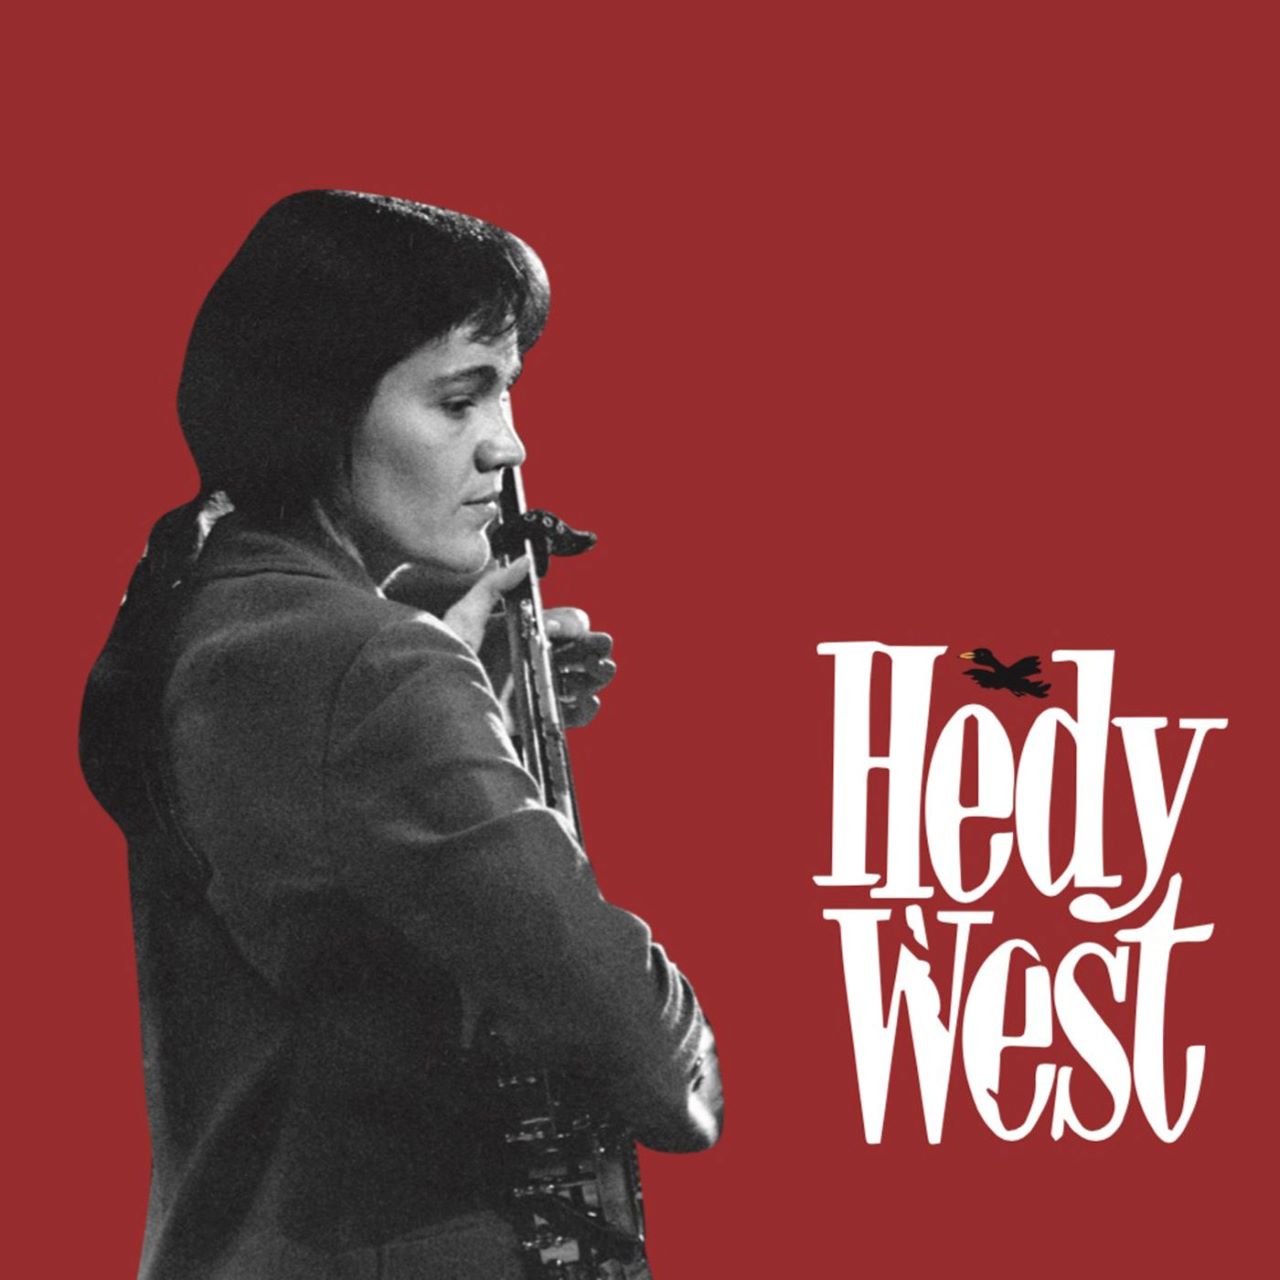 Hedy West